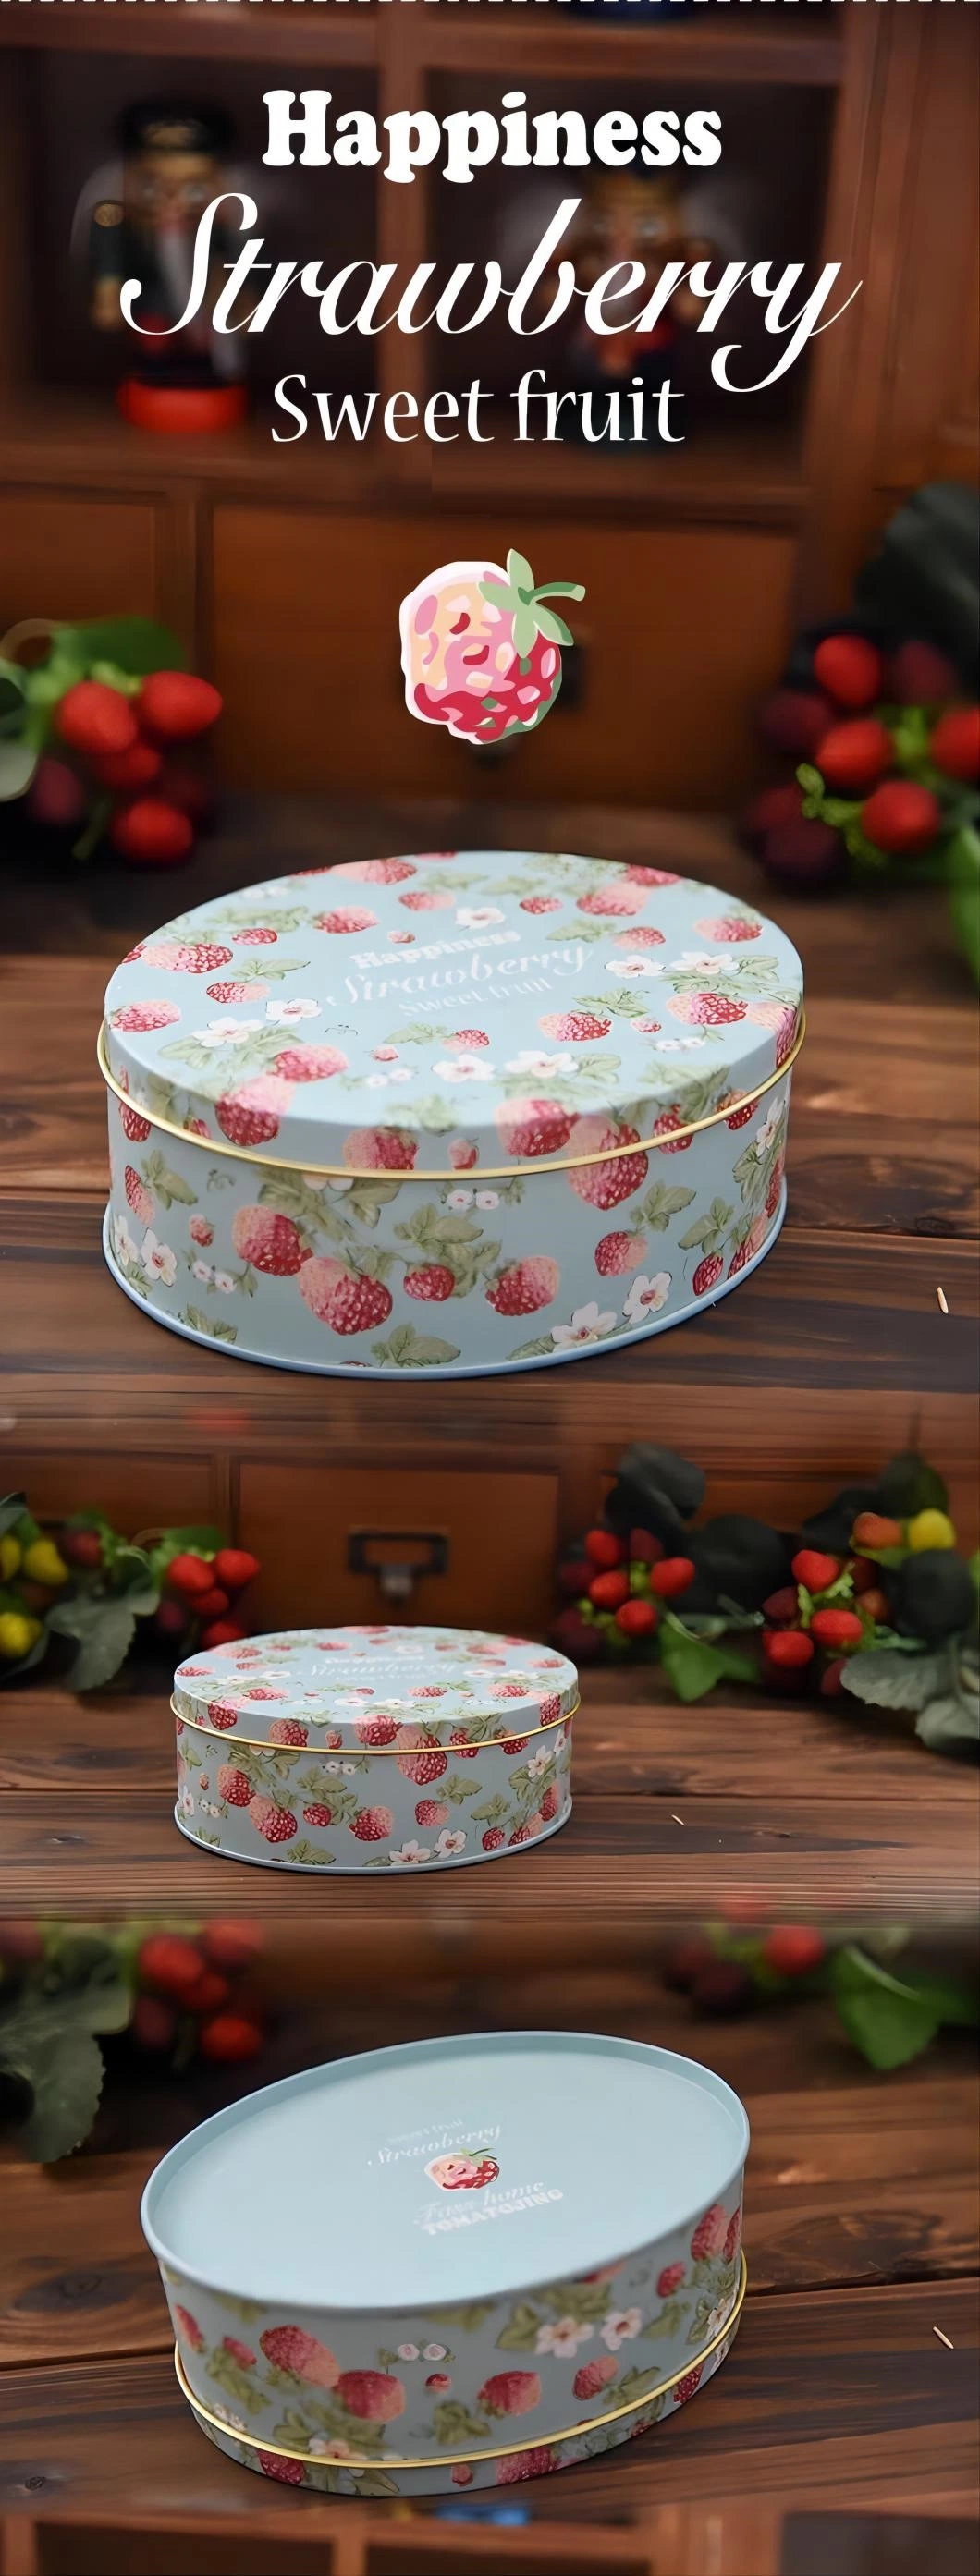 Hot Sale Customized Candy/Cookie/ Chocolate Tin Gift Box European Style Tin Packaging Box Wedding Packing Box